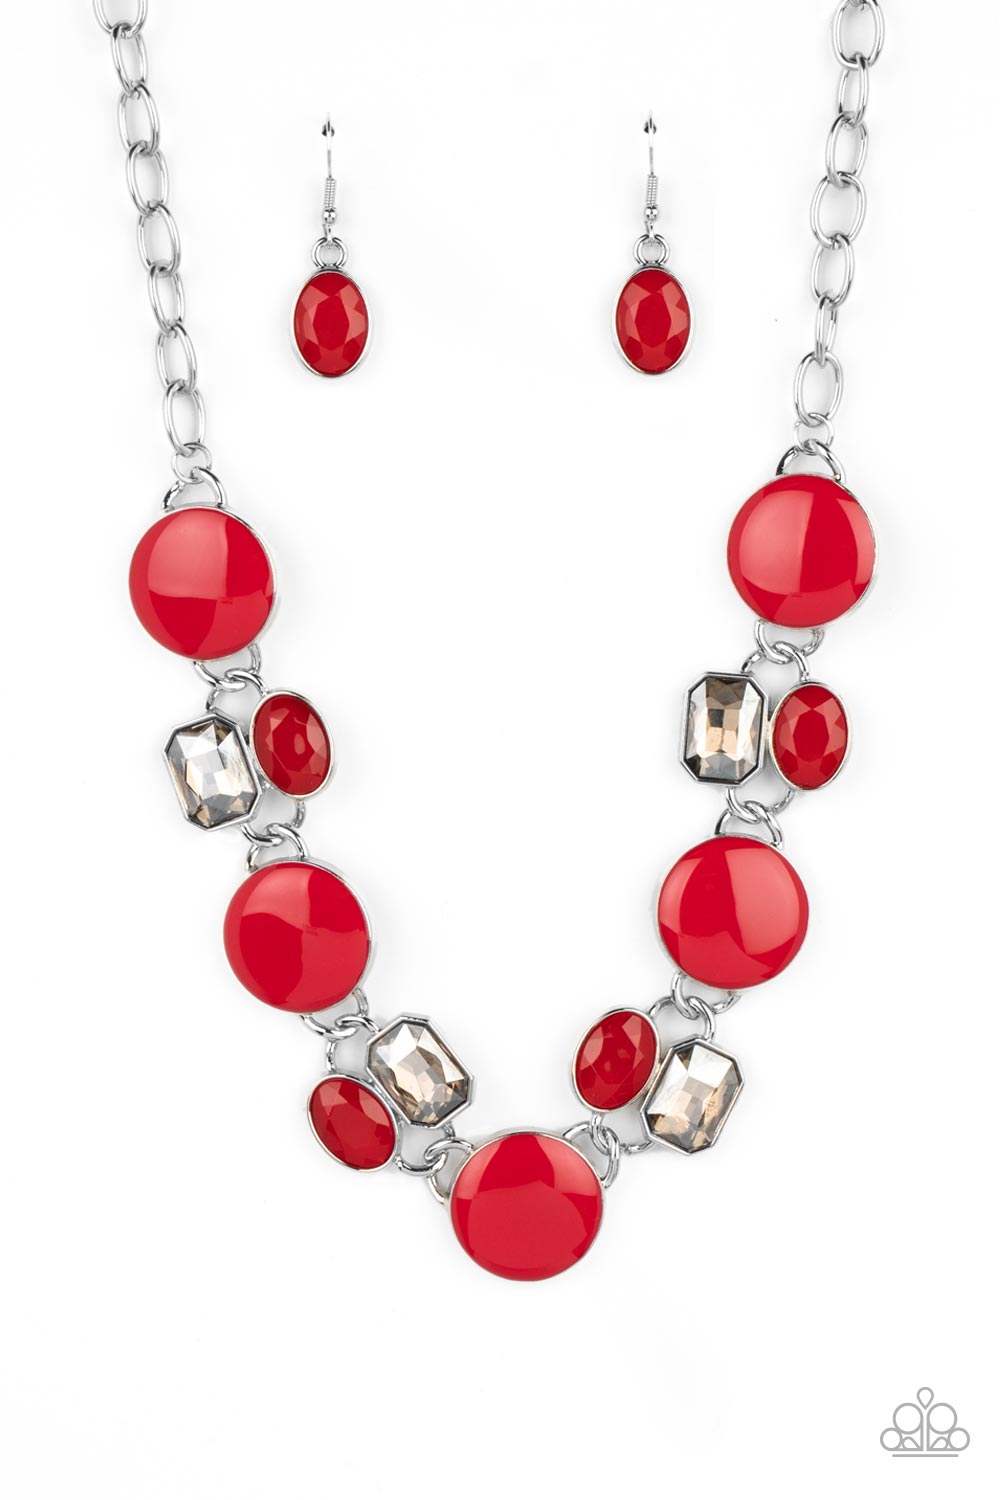 Necklace - Dreaming in MULTICOLOR - Red